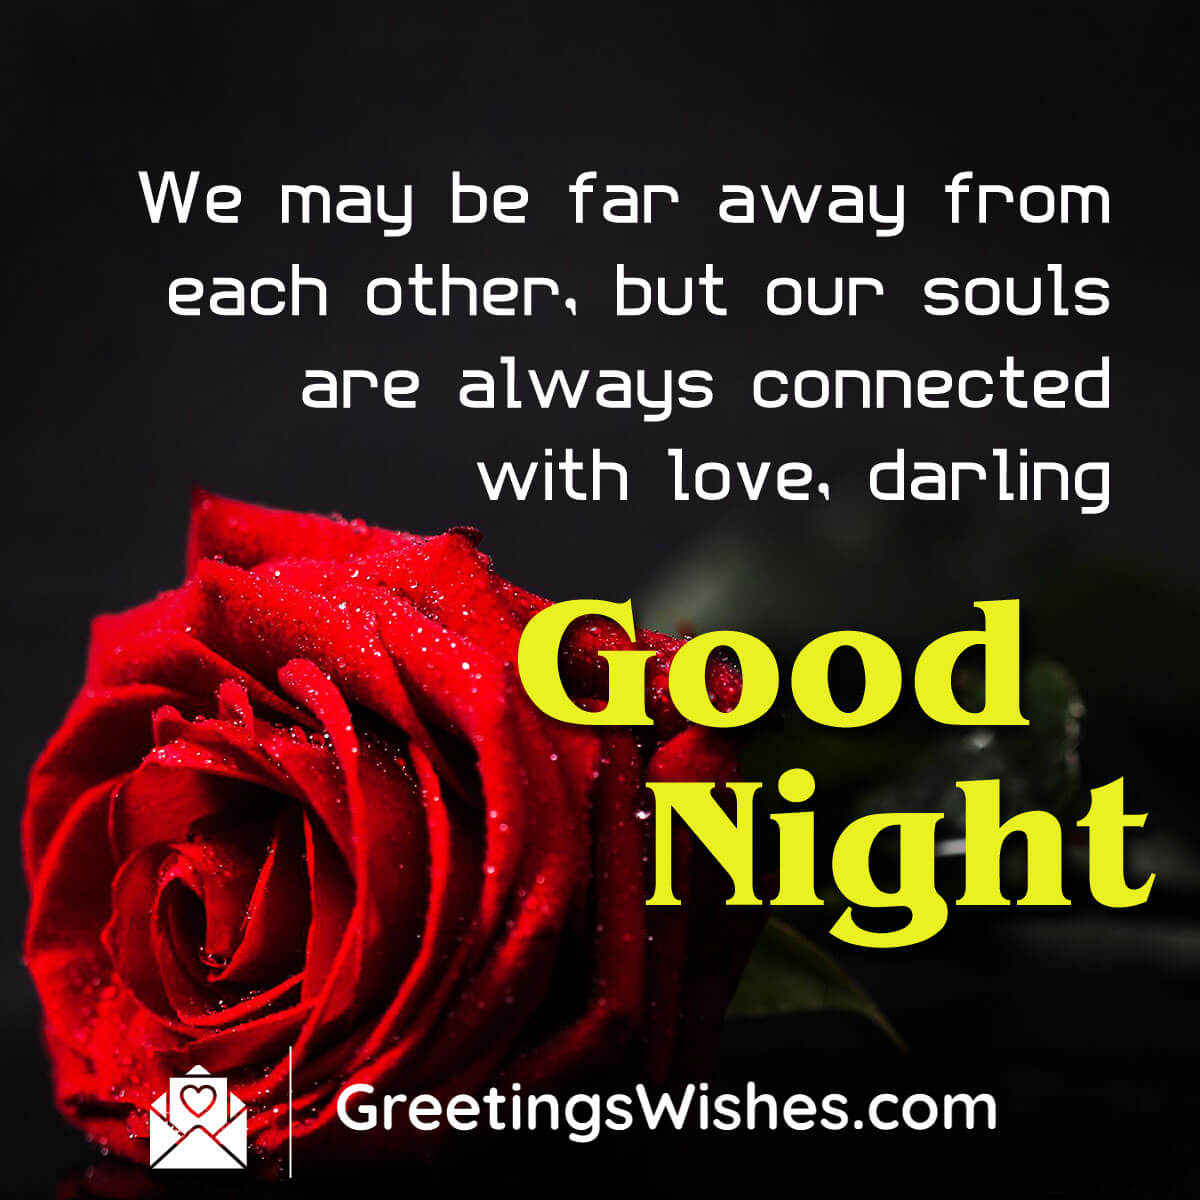 Romantic Good Night Wishes - Greetings Wishes